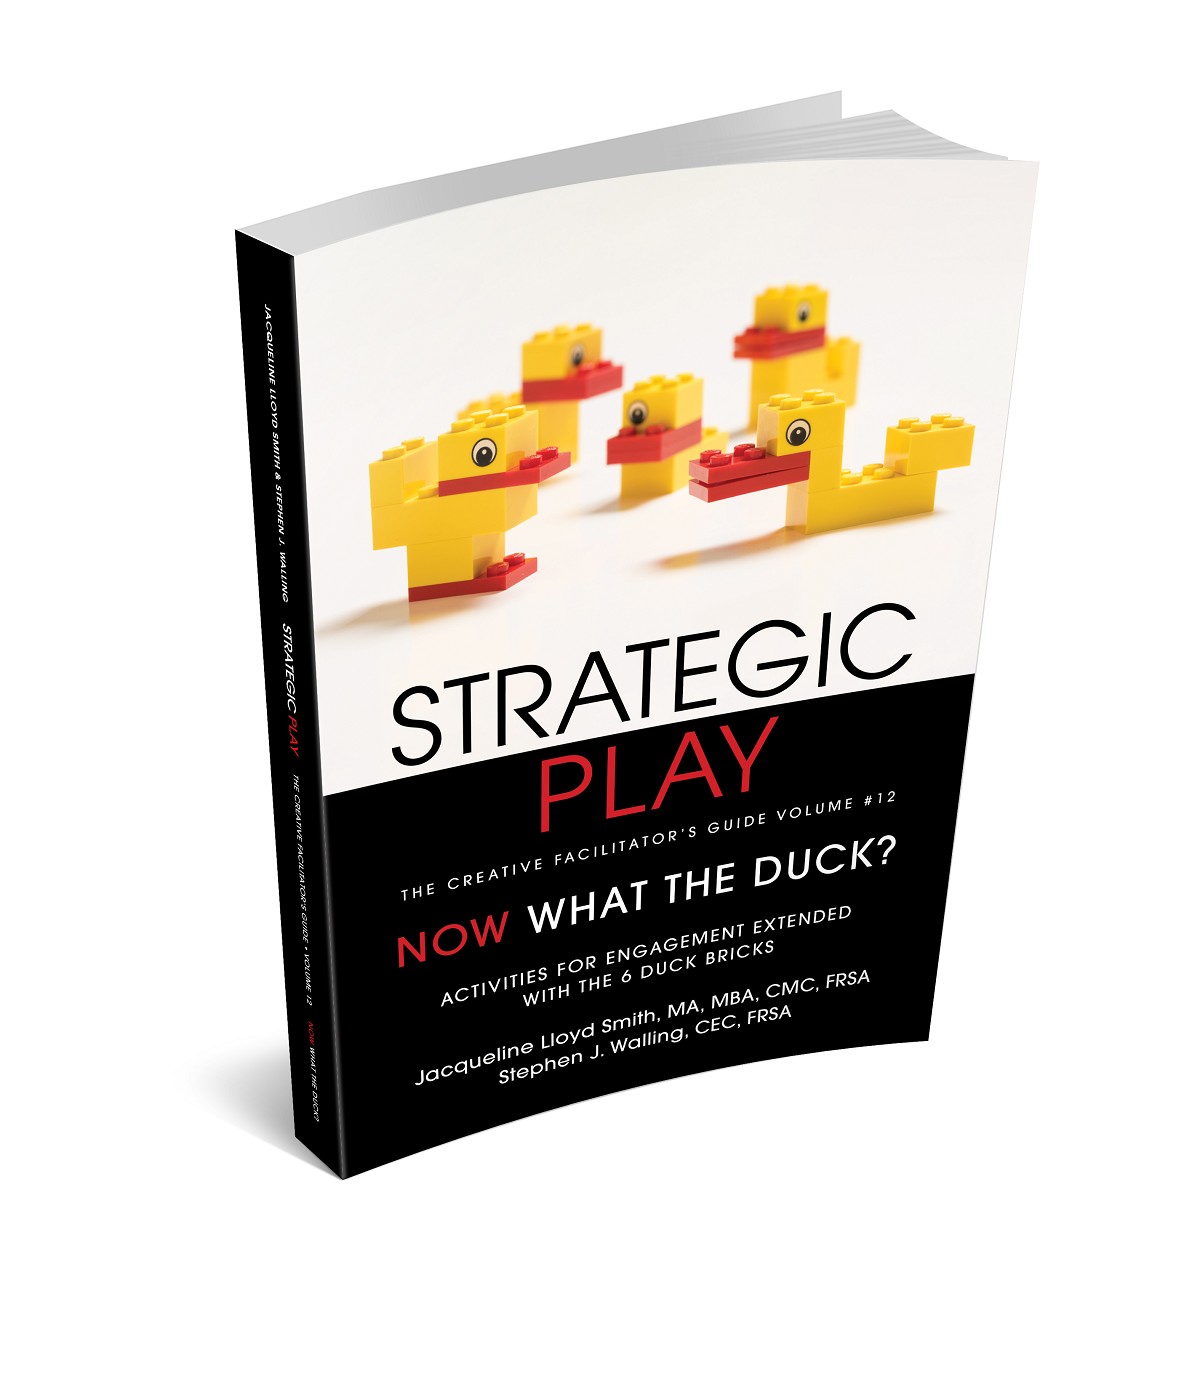 wzw-strategic-play-now-what-the-duck